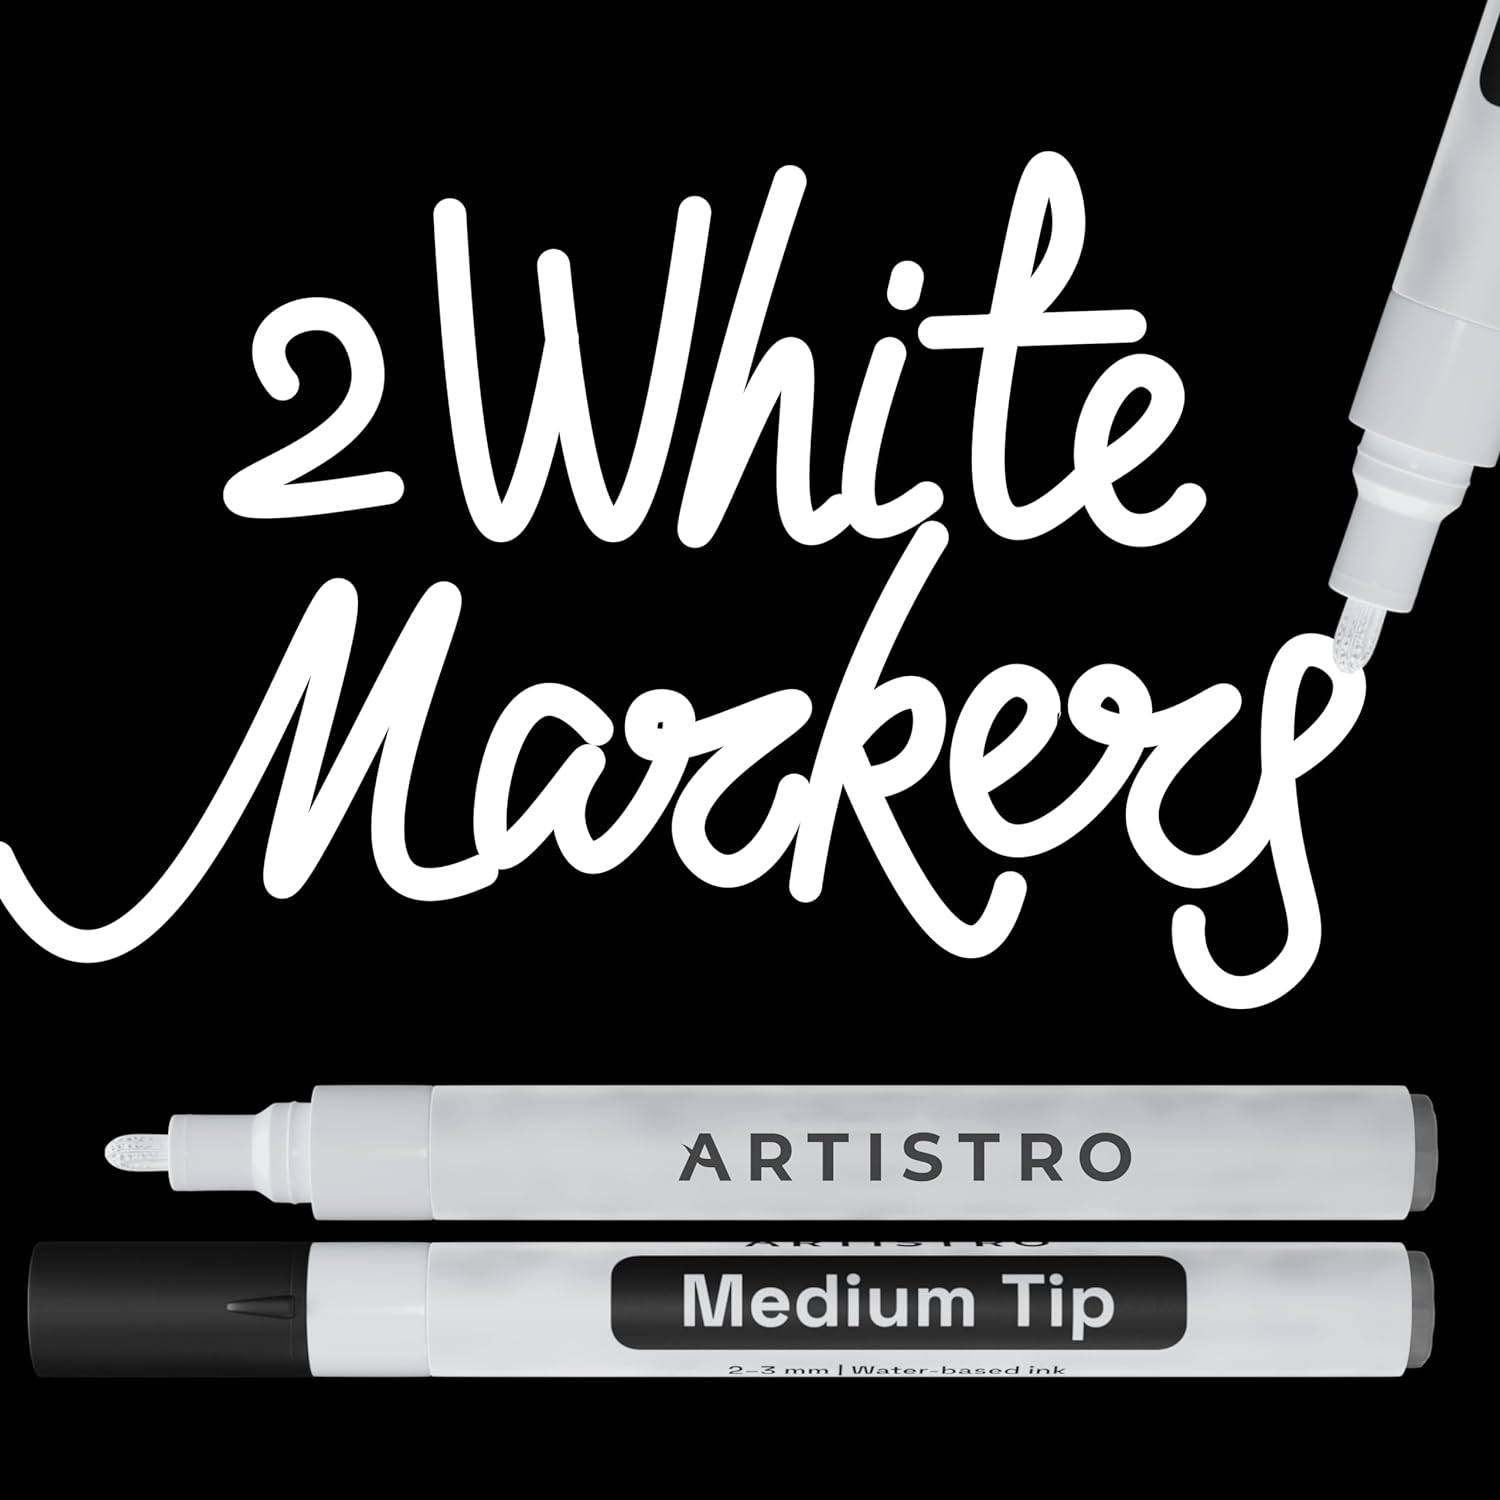  White Paint Pen for Art- 8 Pack Acrylic White Paint Markers  2-3mm Medium Tip for Wood, Rock, Black Paper, Metal, Plastic, Glass,  Canvas, Ceramic, Egg, Tire, Pumpkin, Water Based DIY